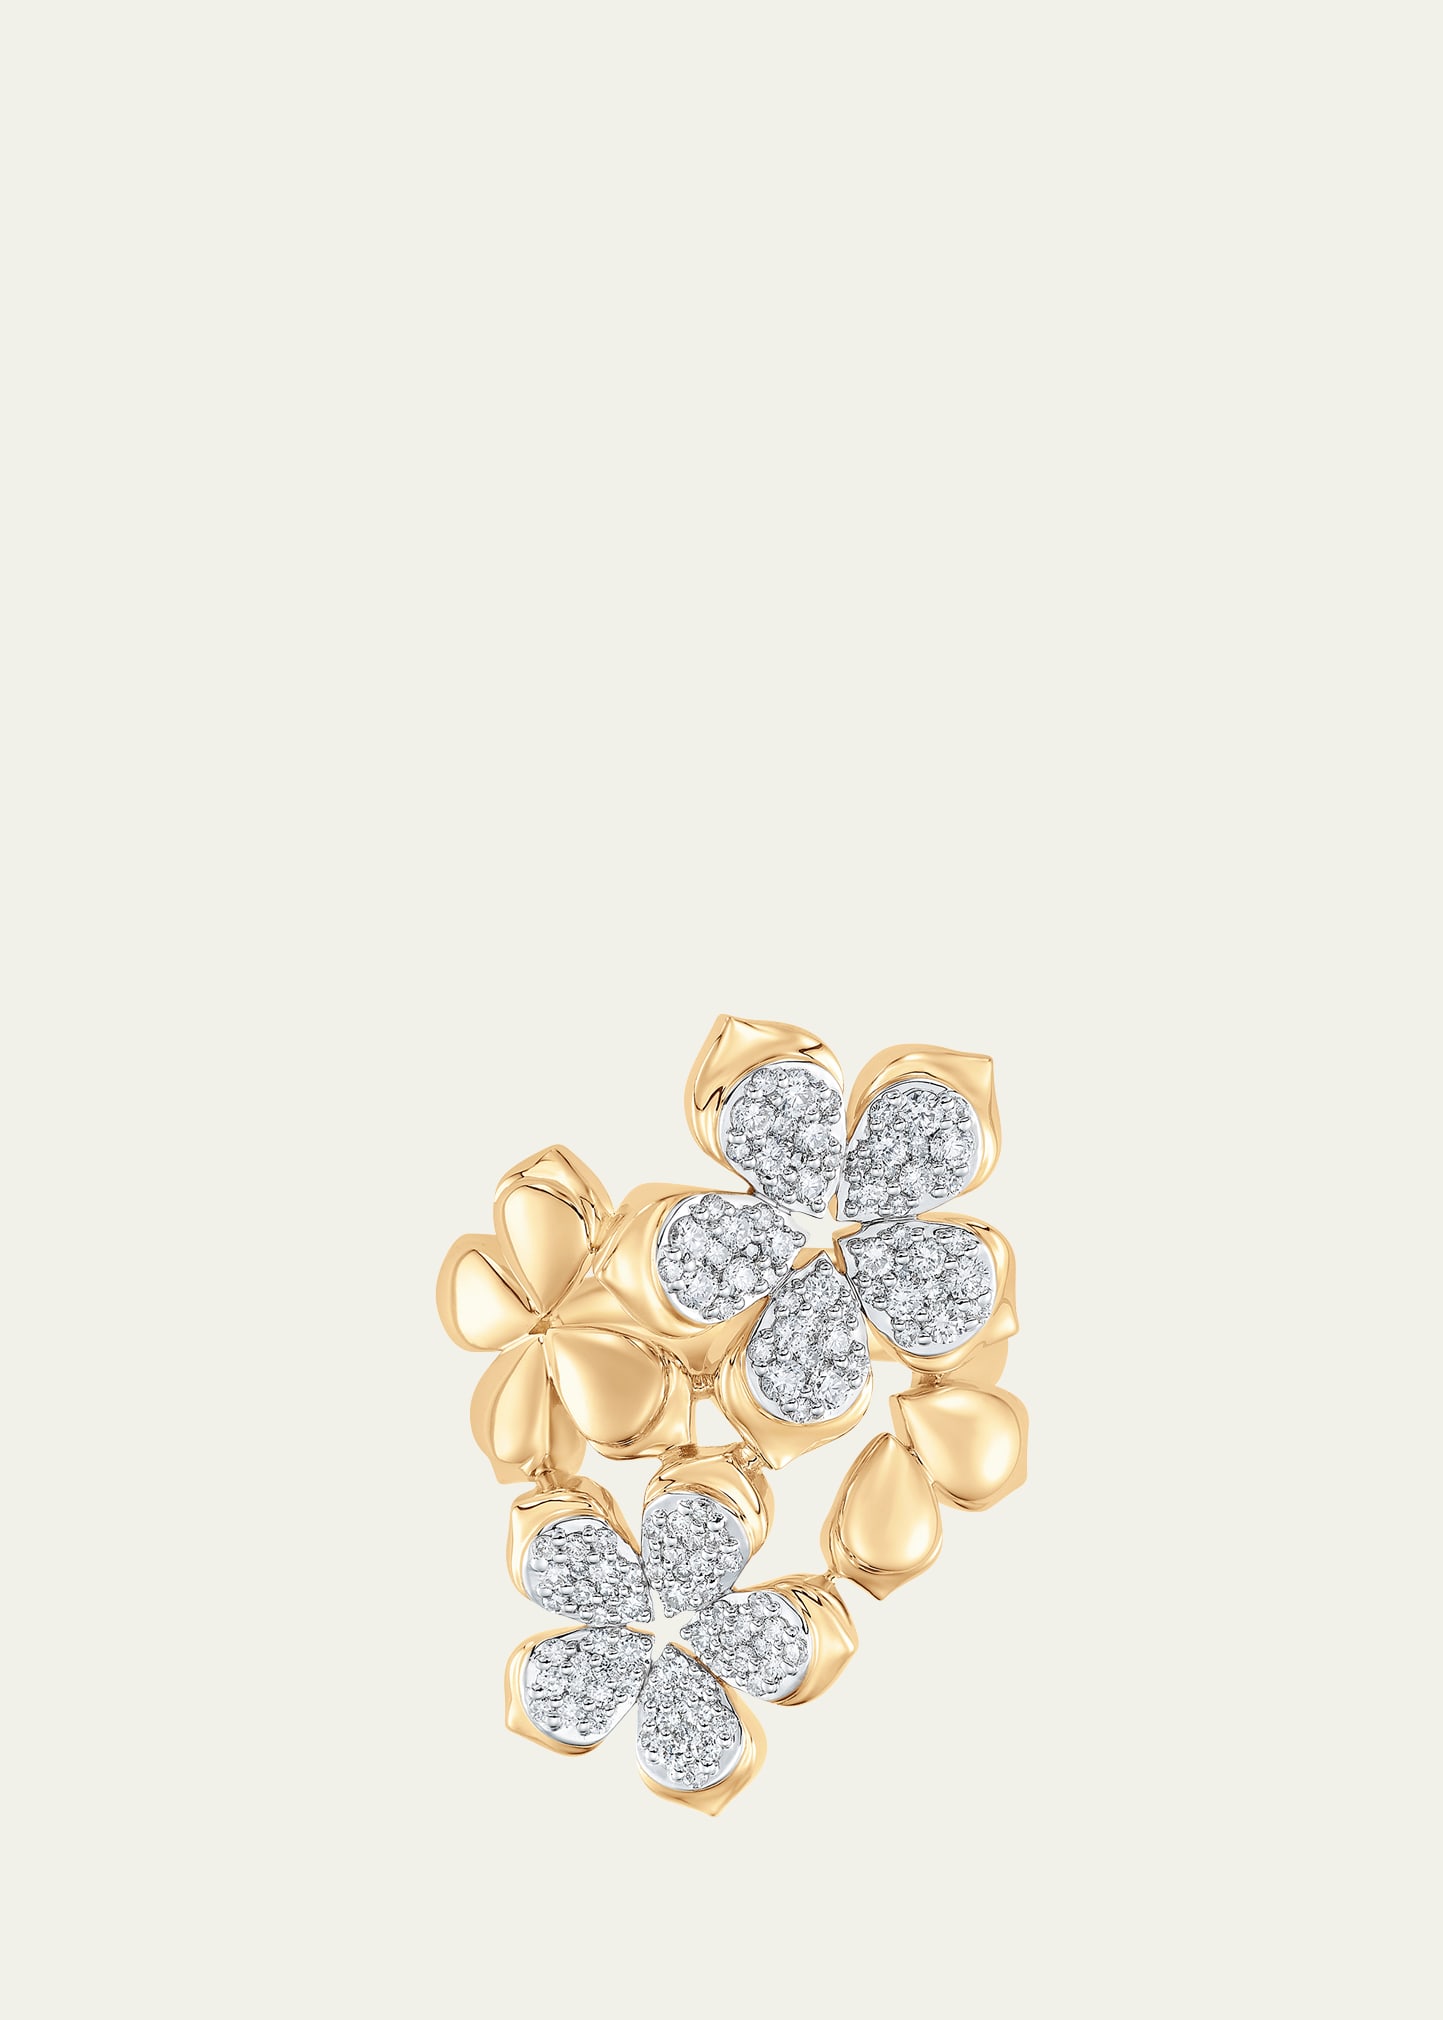 18K Two-Tone Gold Lierre Diamond Flower Cluster Ring